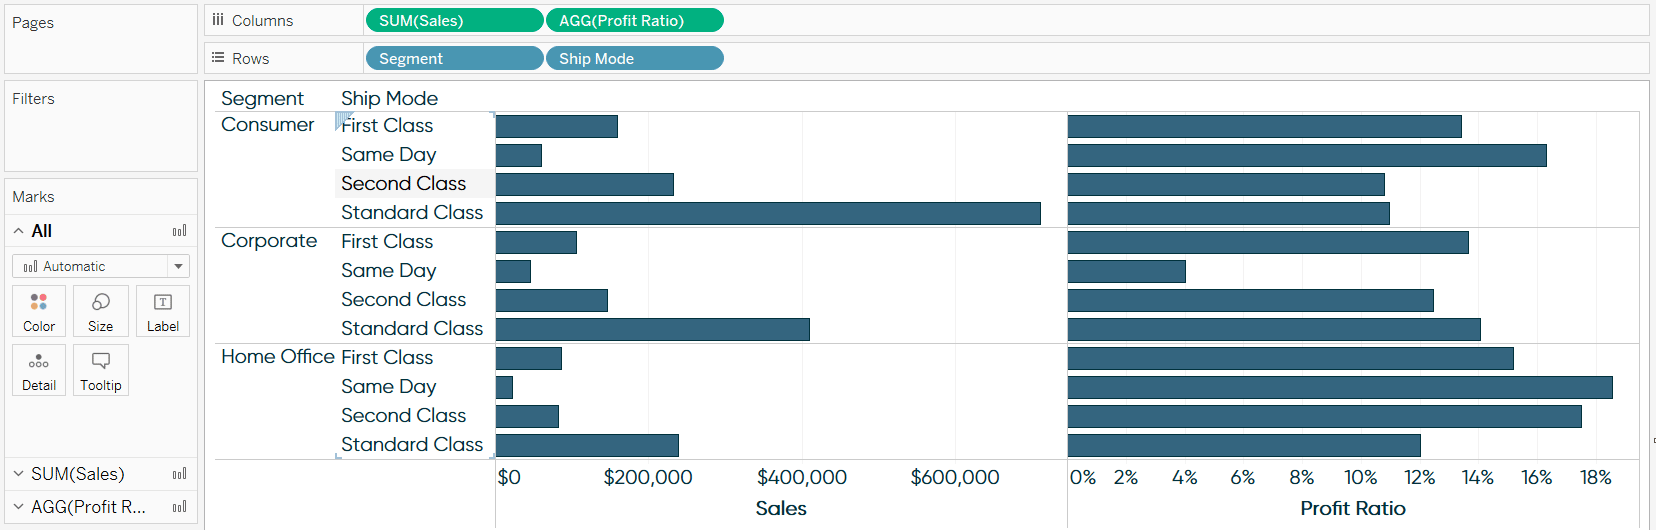 Tableau Sales and Profit Ratio by Segment and Ship Mode Dimension No Tooltip